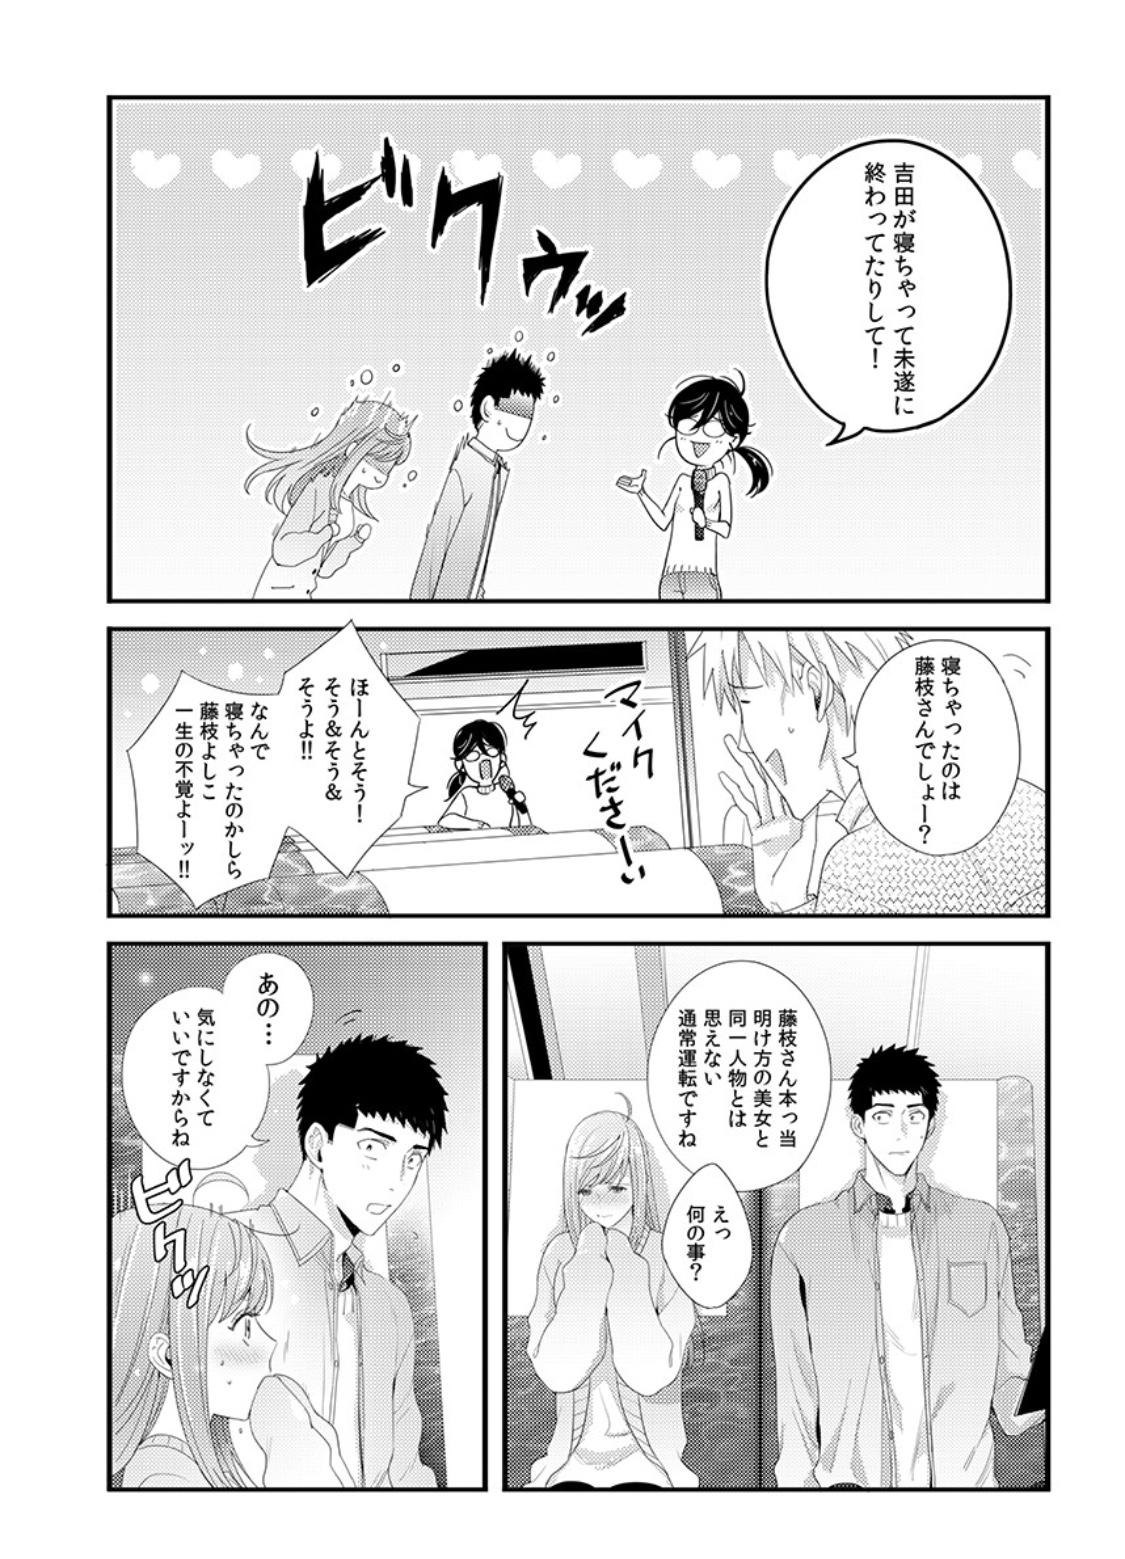 Please Let Me Hold You Futaba-San! Ch. 1-4 32